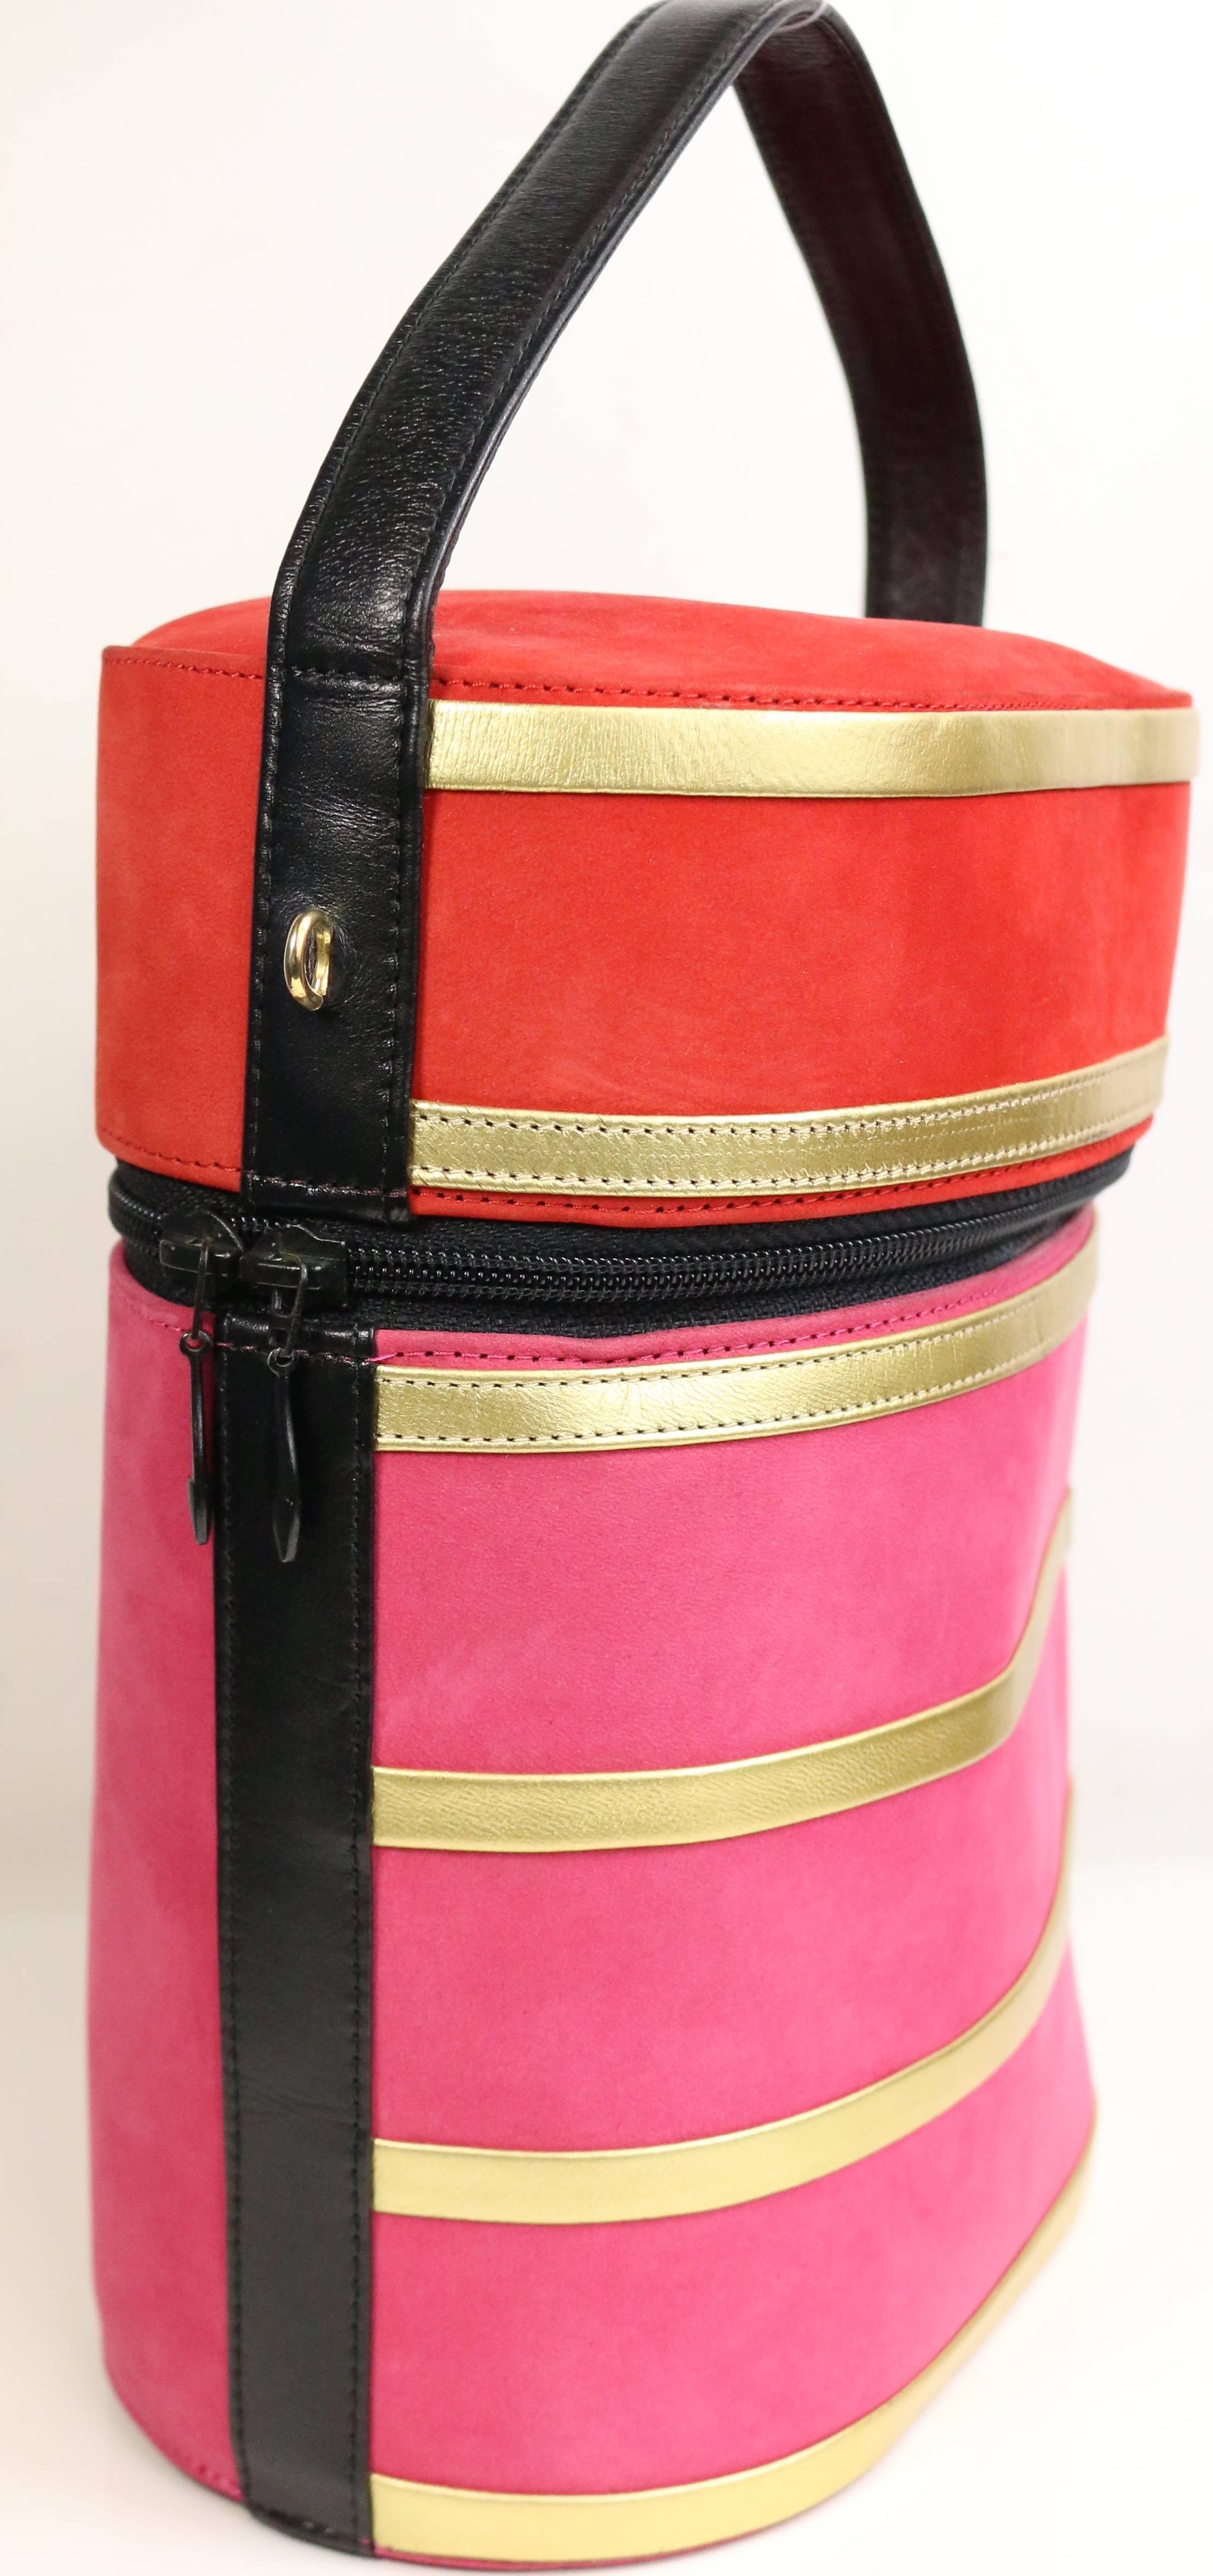 - Vintage 80s Charles Jourdan red and pink suede gold leather stripes round shaped handbag with detachable black leather strap. Lovely bold colours suede is one of a kind!!!

- Made in France. 

- Length: 6 inches. Height: 8 inches. Strap